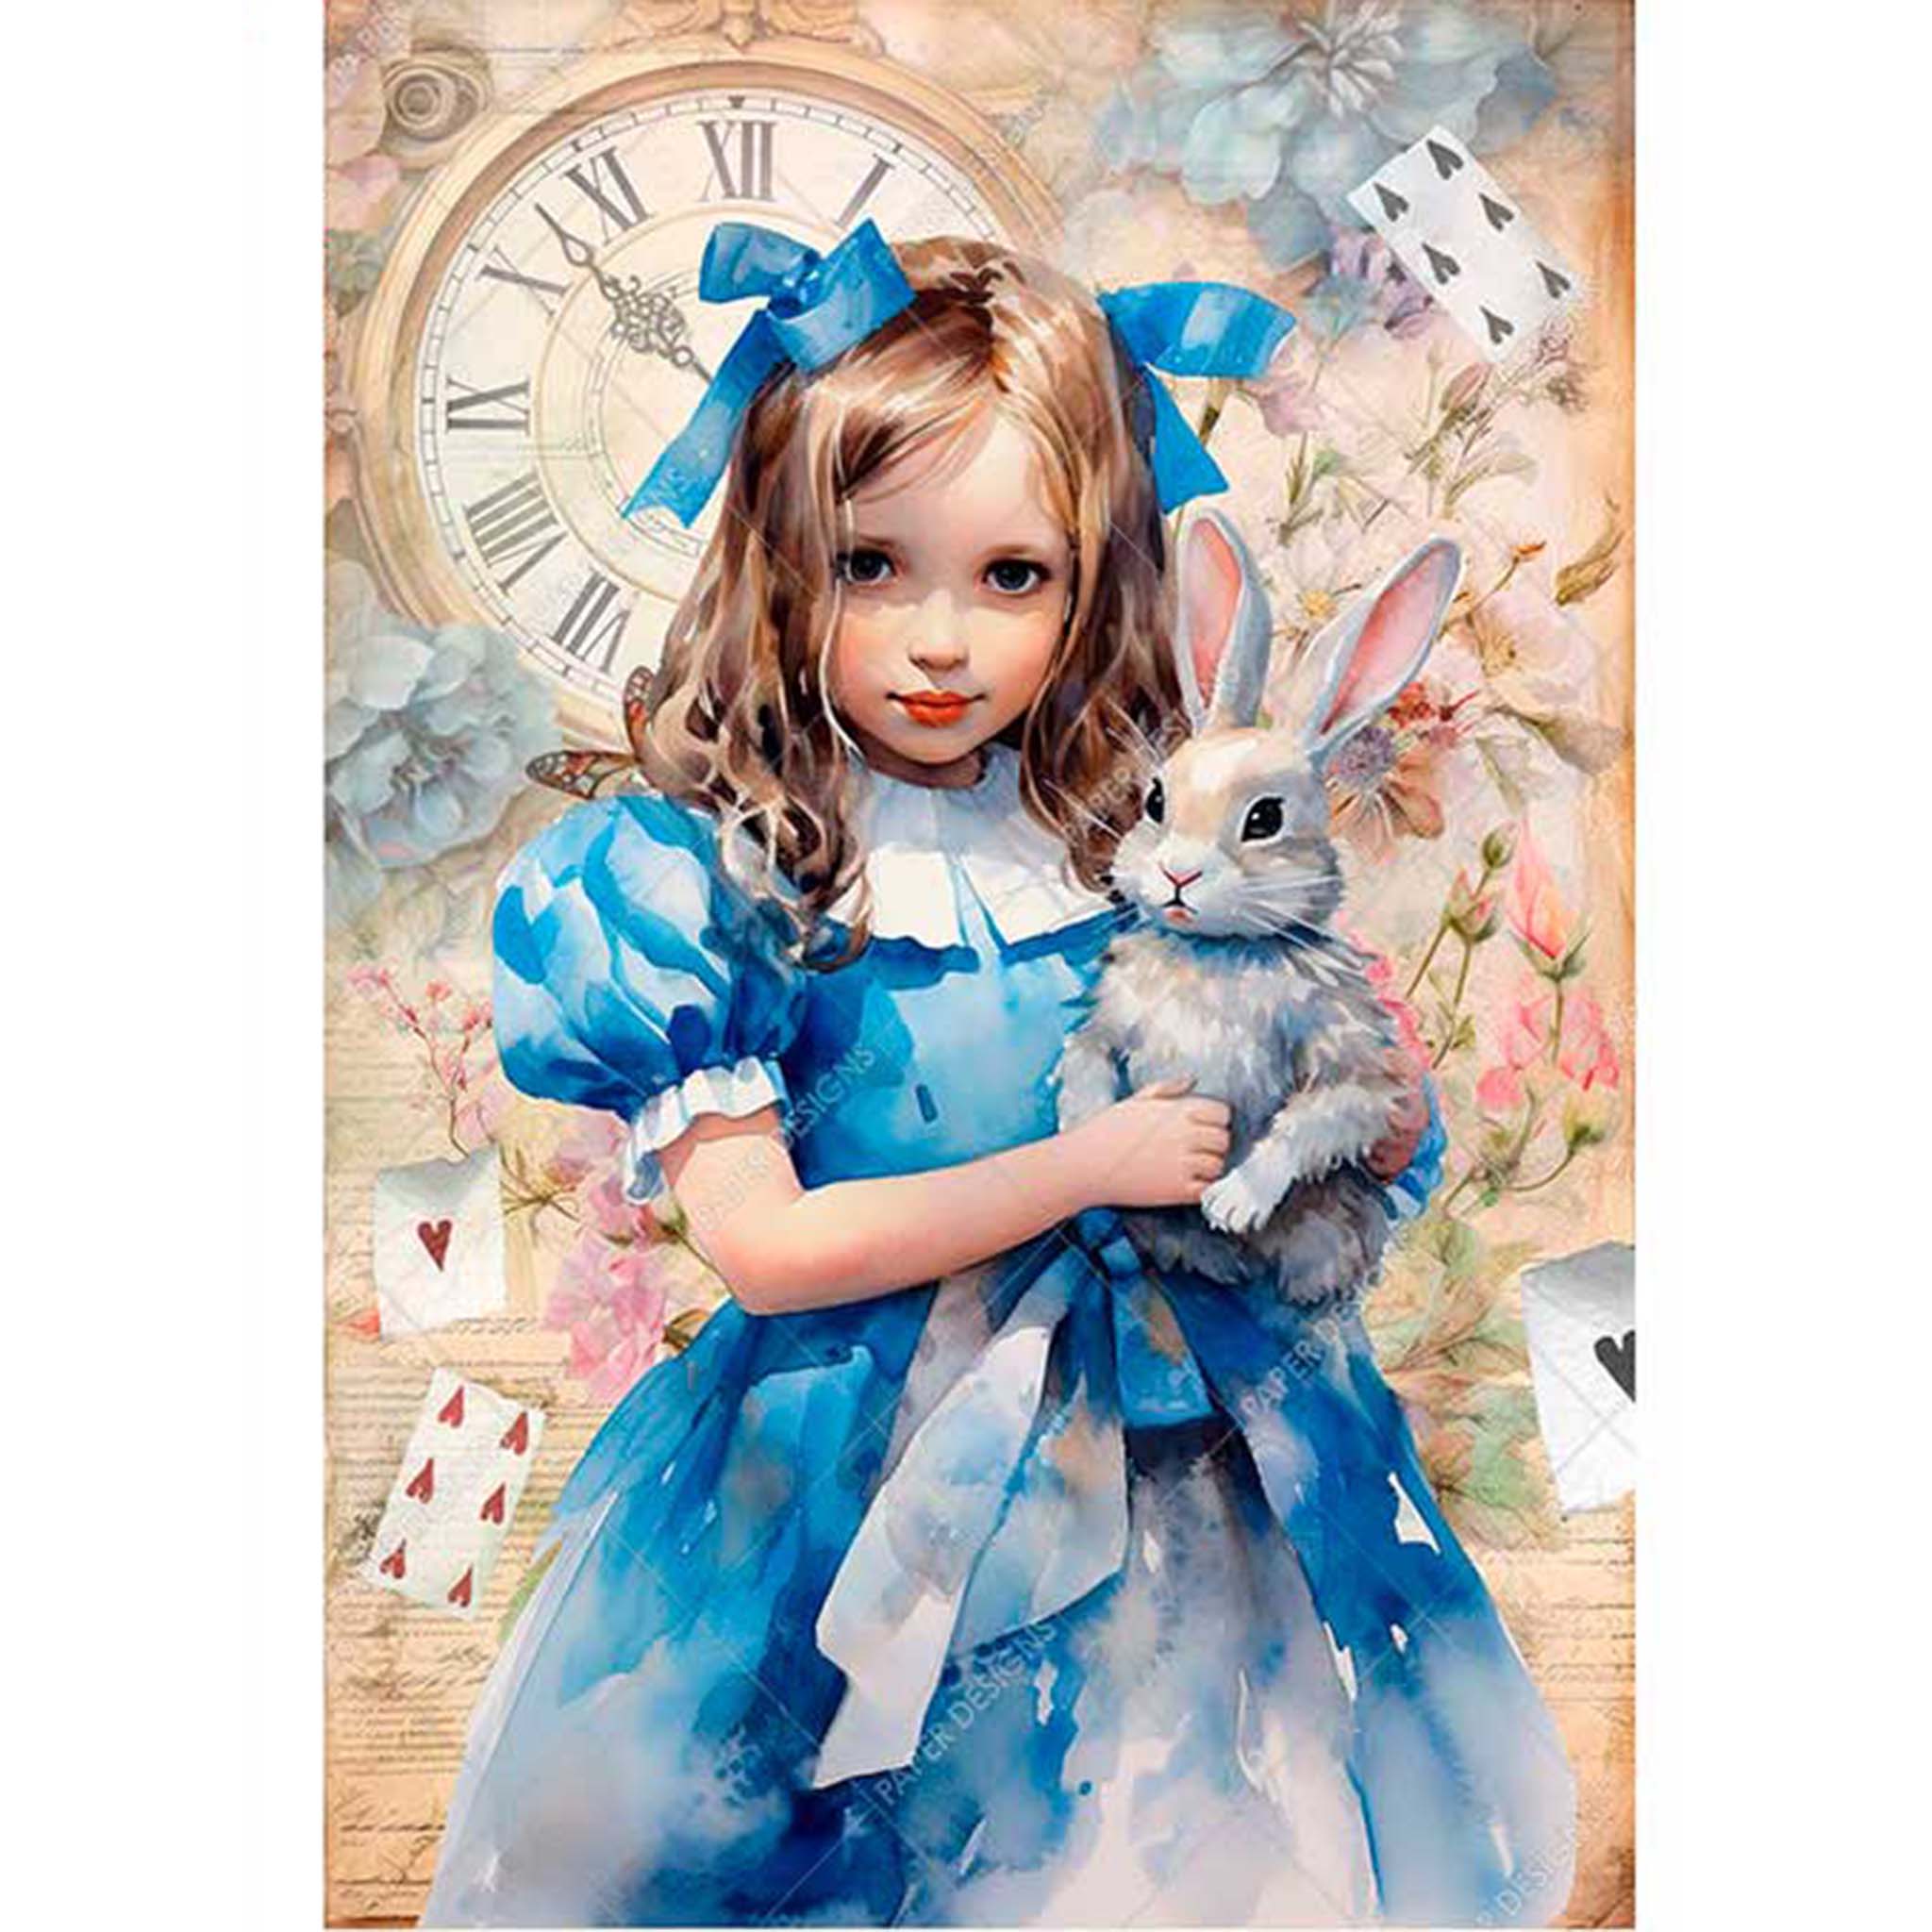 A0 rice paper design featuring a young Alice holding a white rabbit in front of a background filled with Alice In Wonderland themed items. White borders are on the sides.